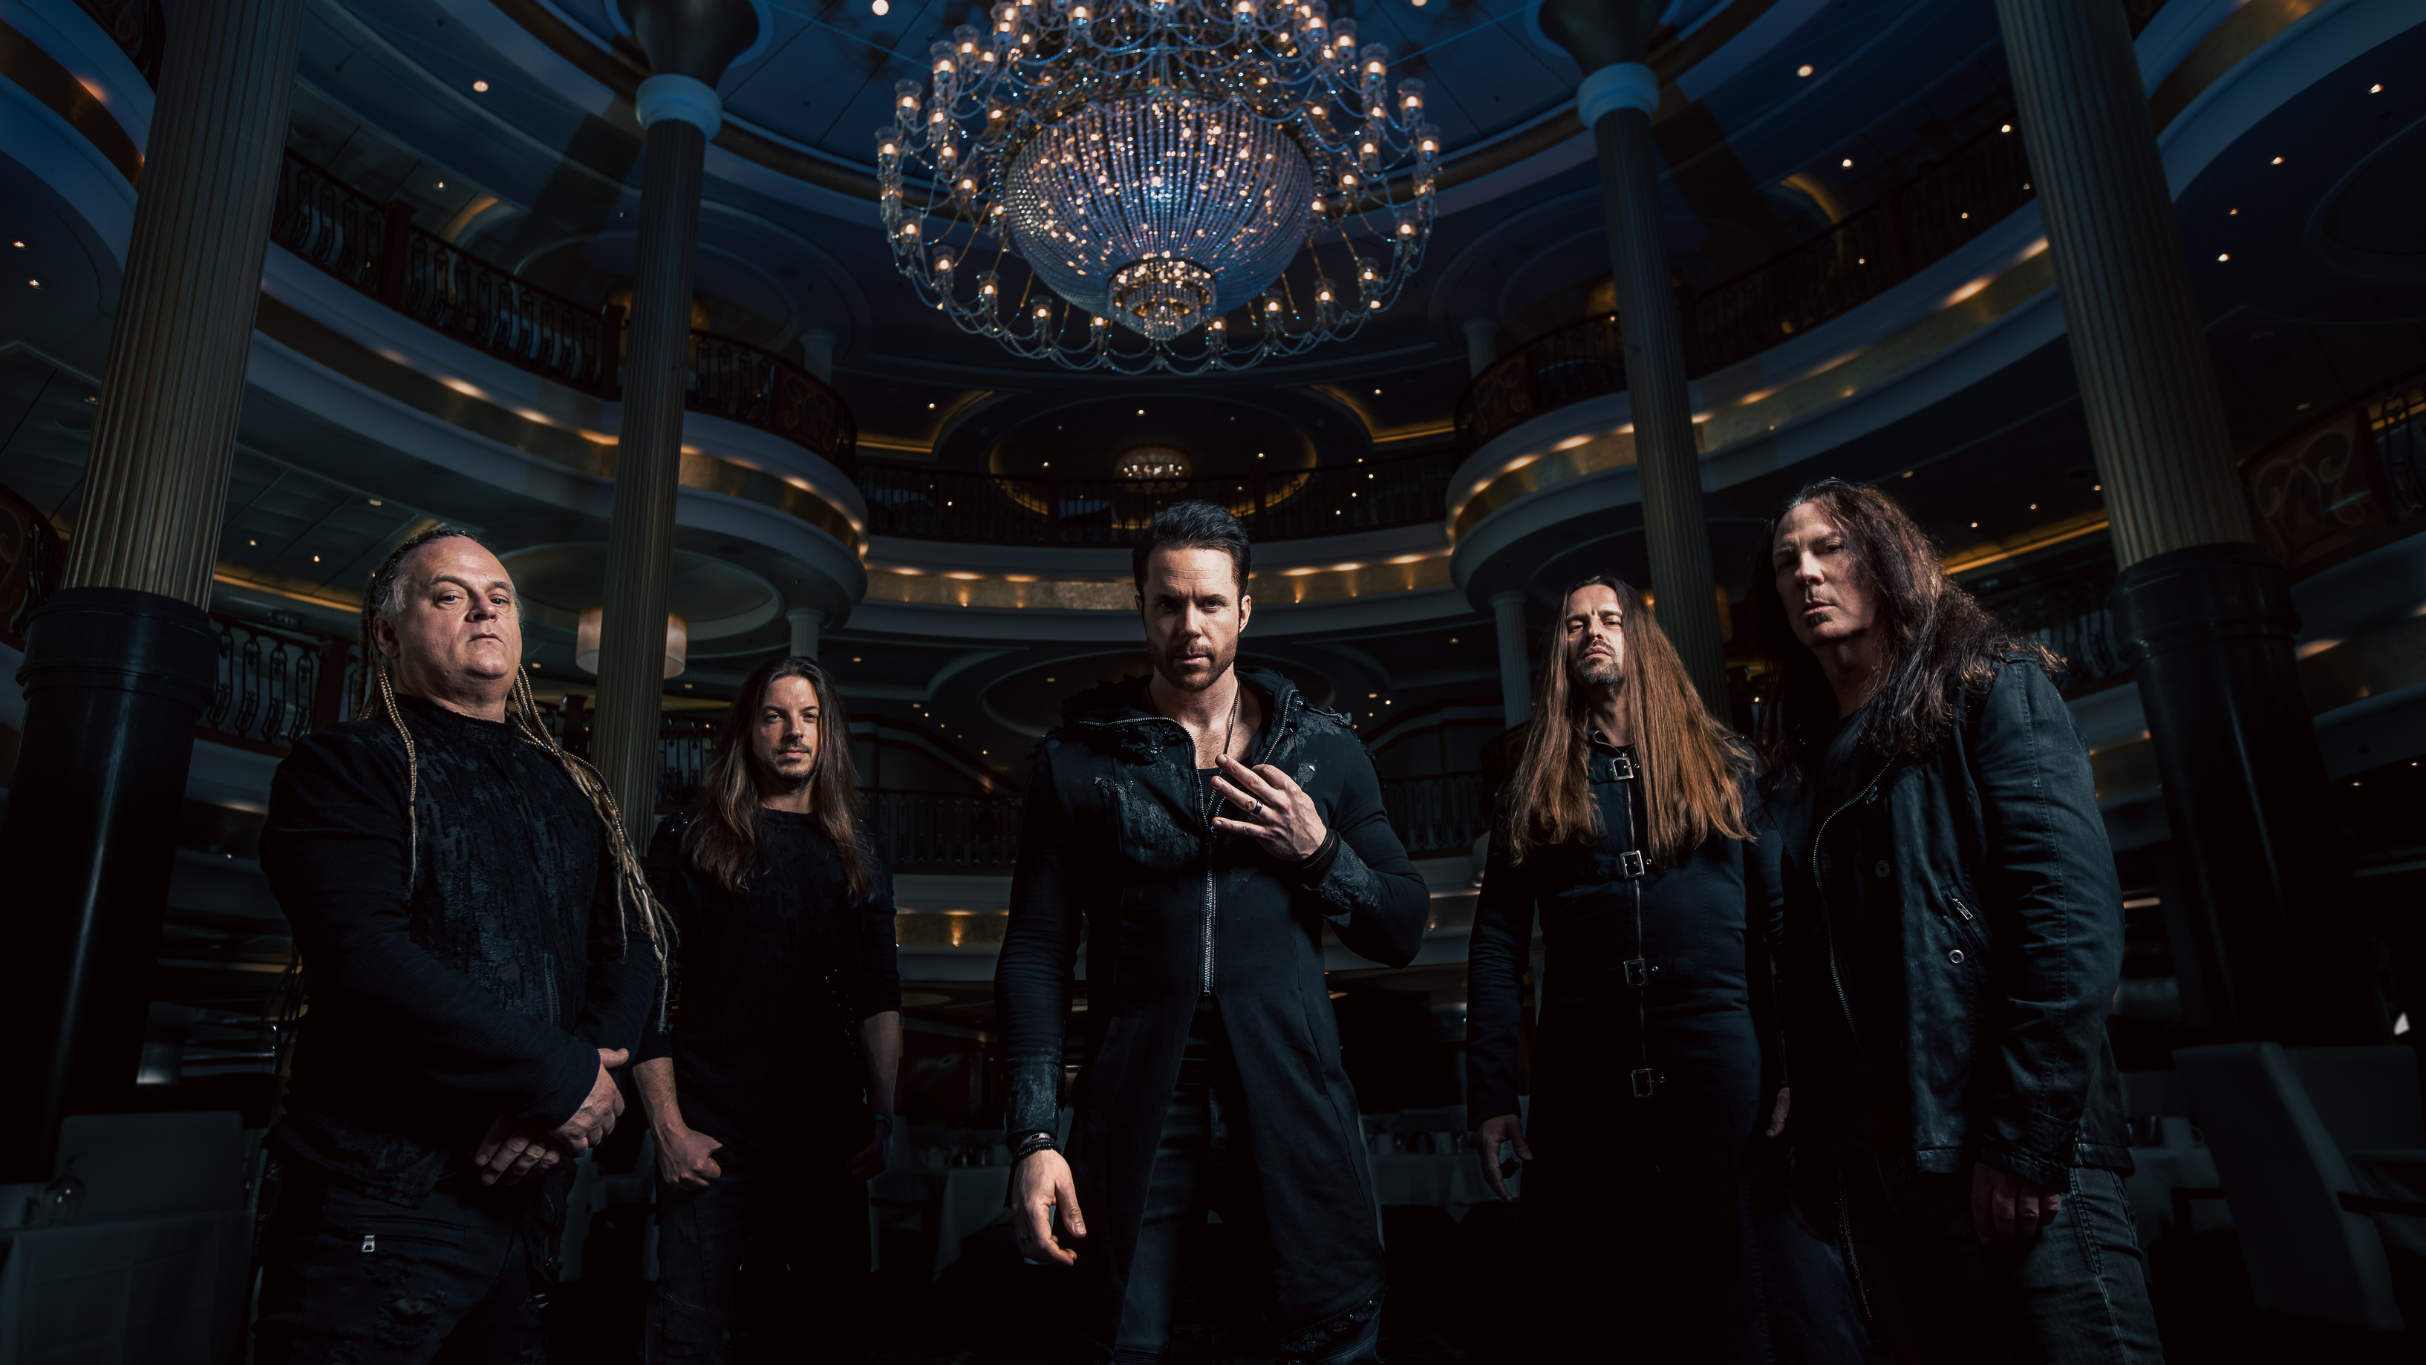 Kamelot w/ Hammerfall at The National